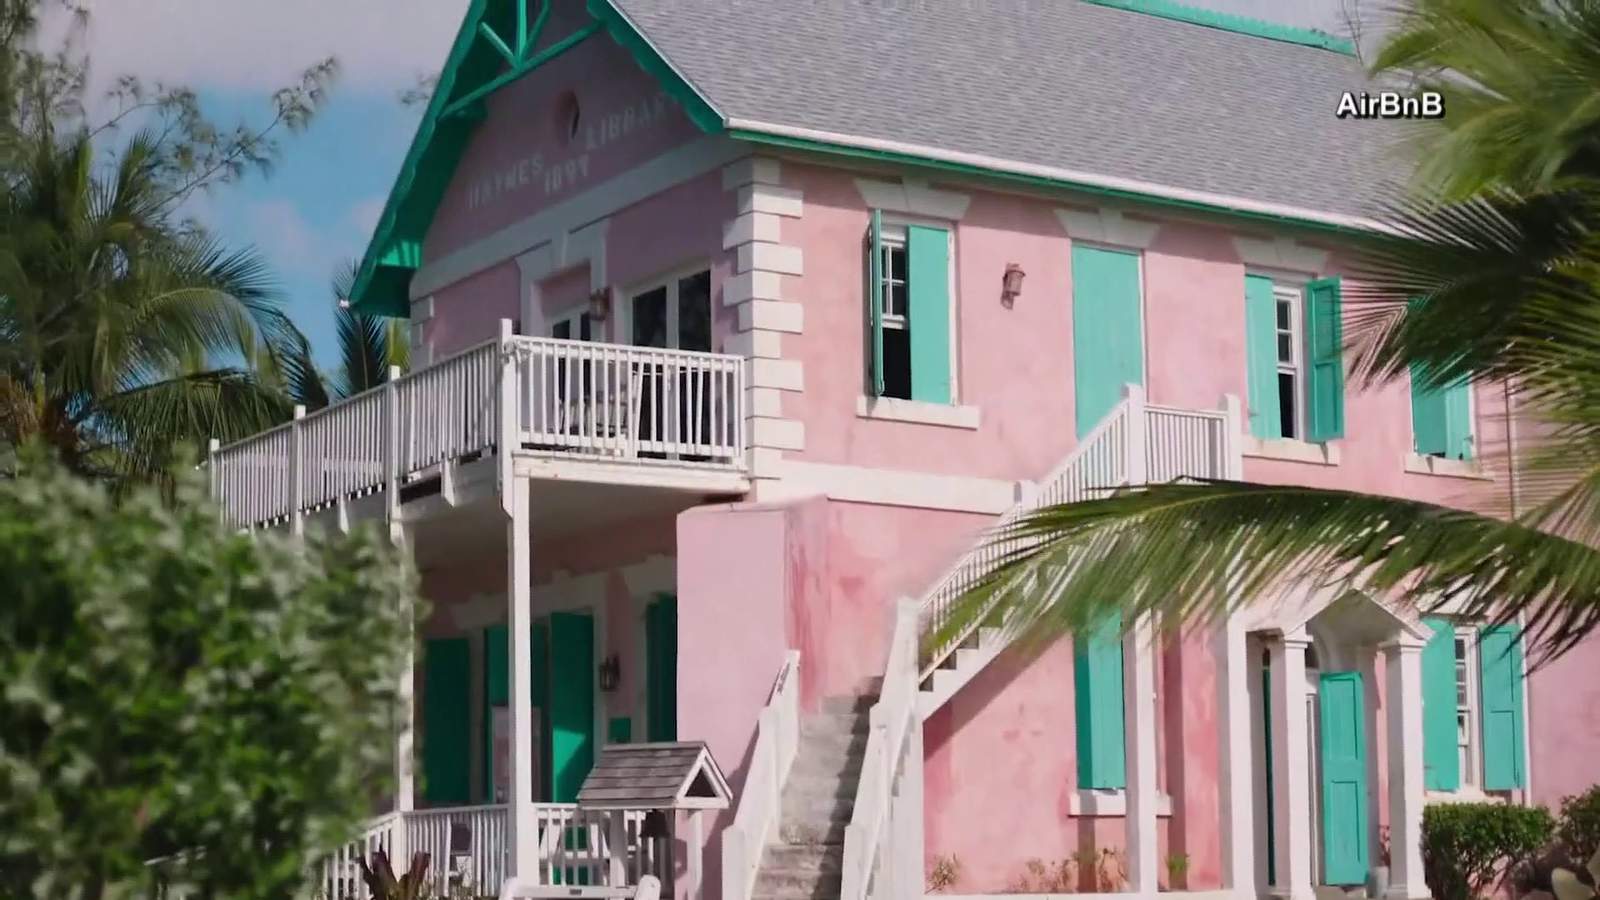 Airbnb offering five people free 2-month sabbatical in the Bahamas